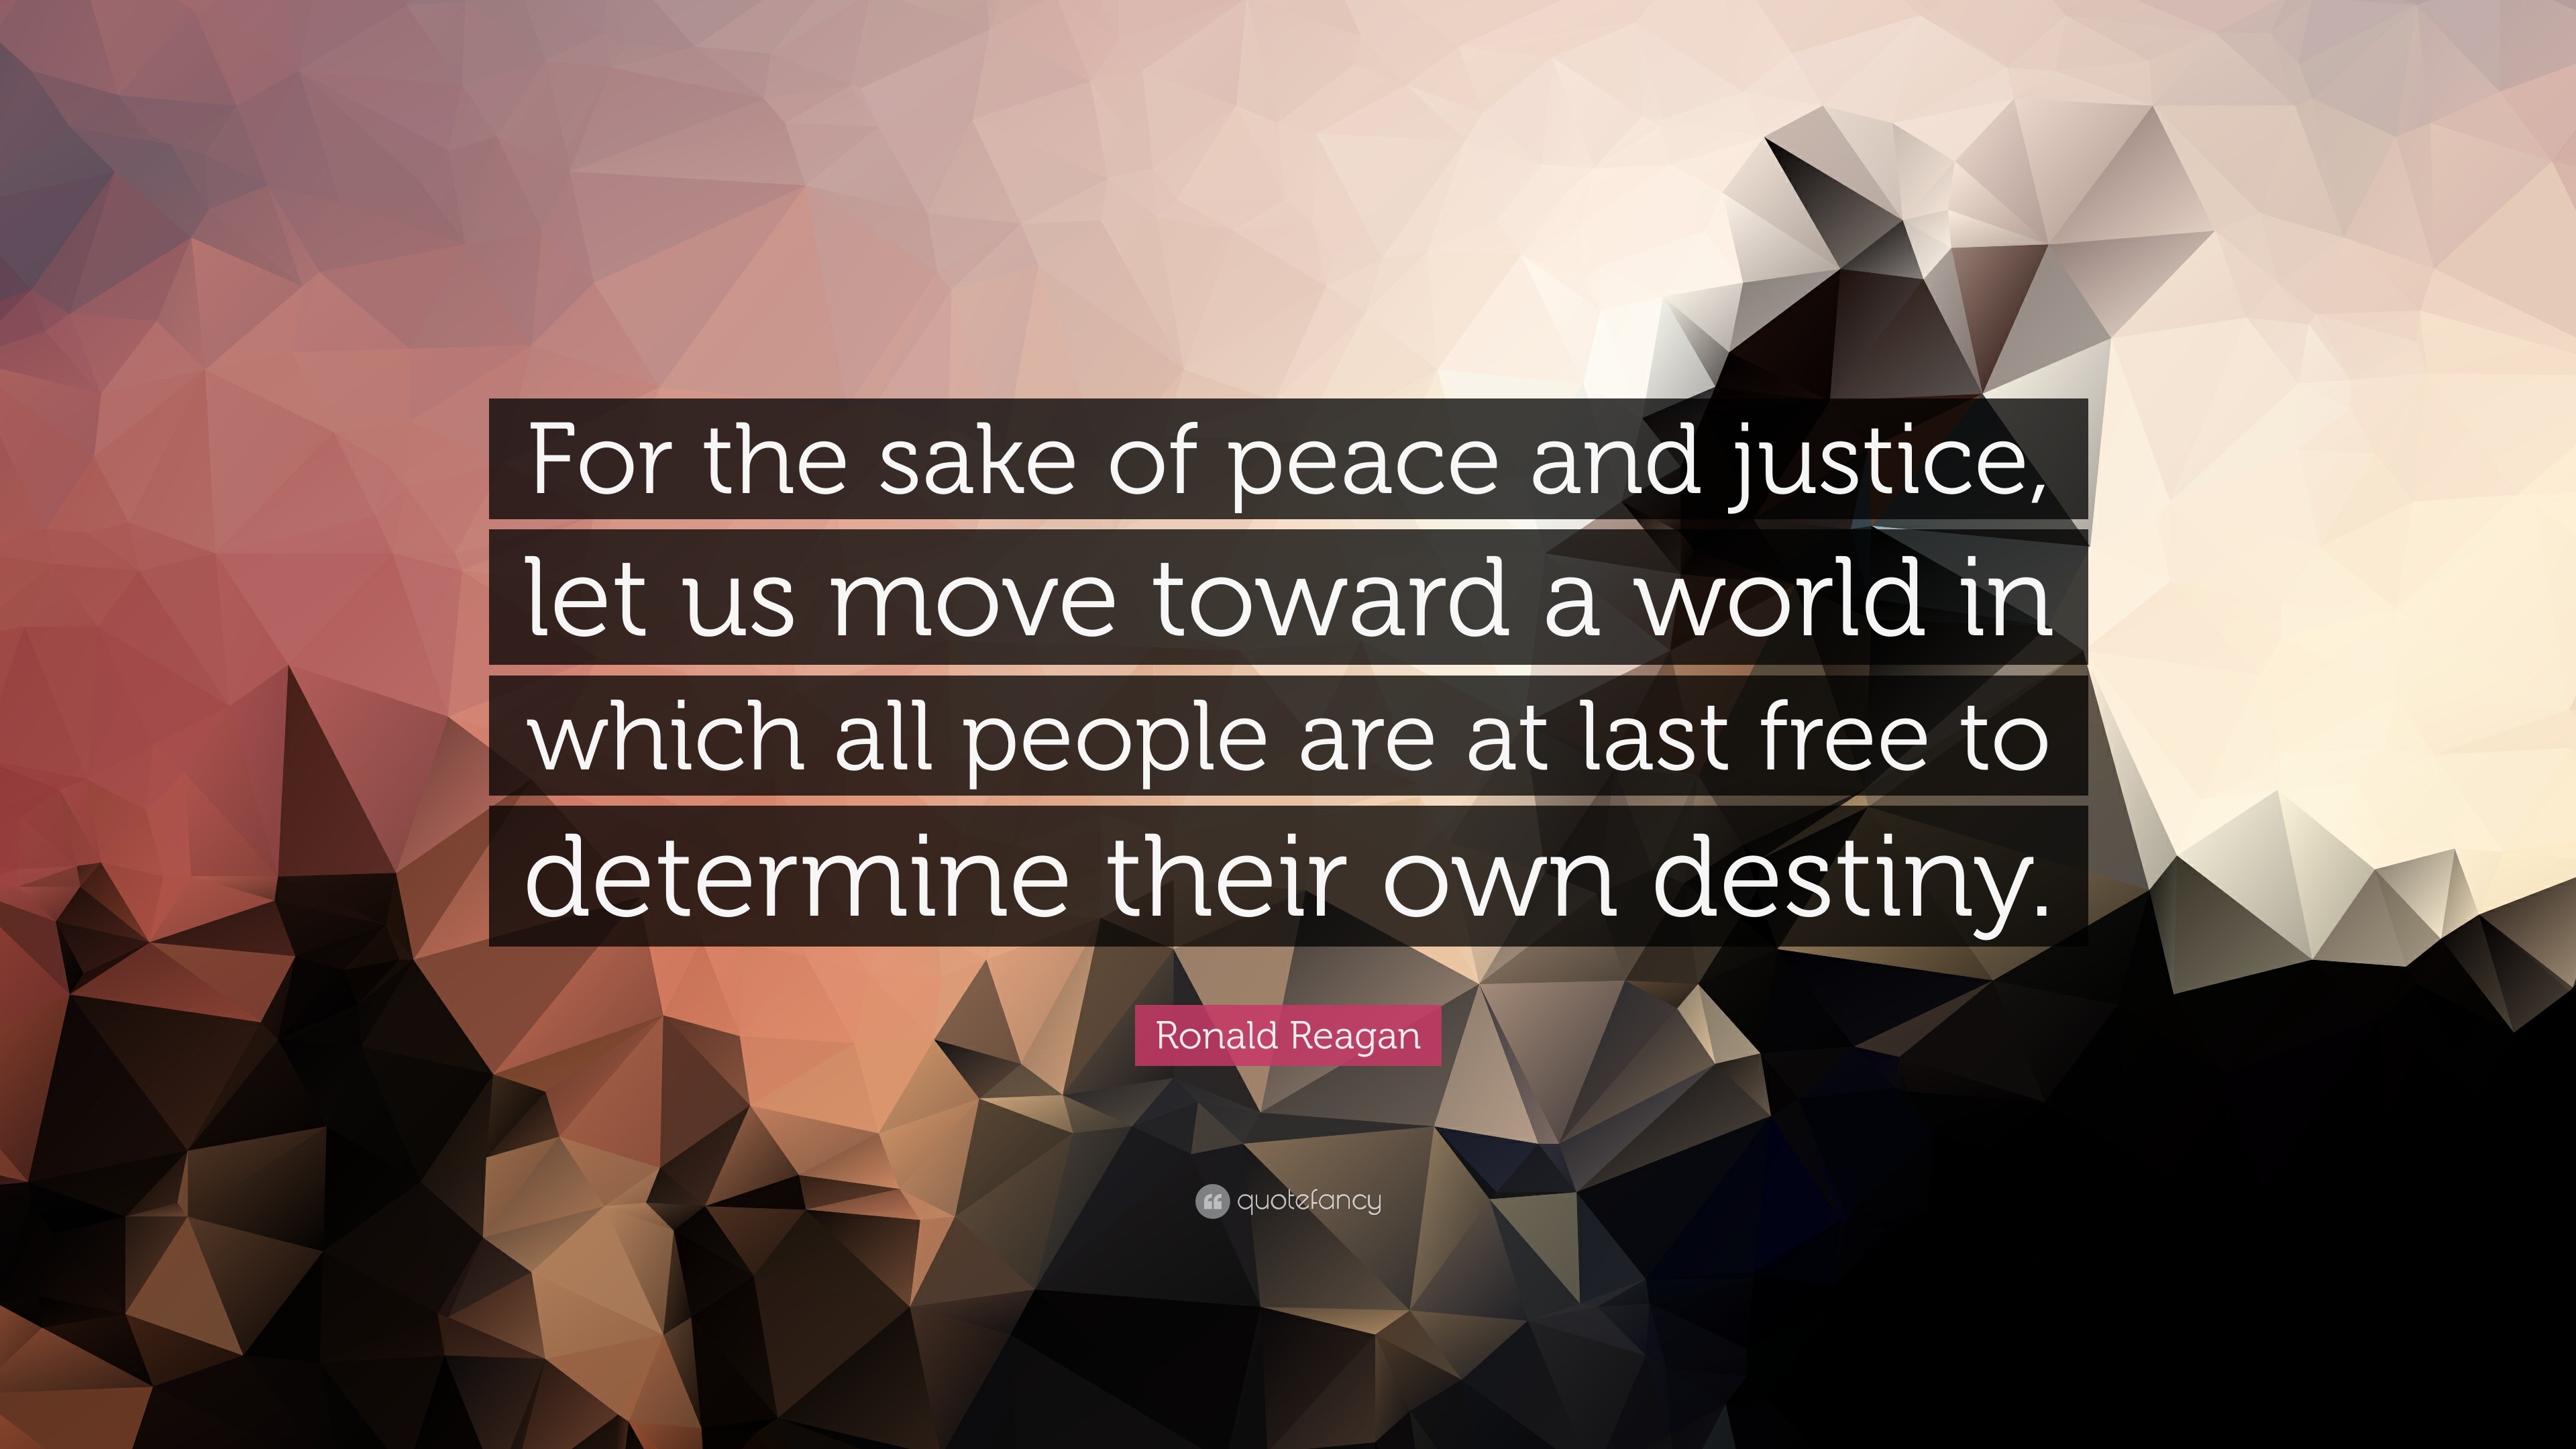 Essay on peace and justice